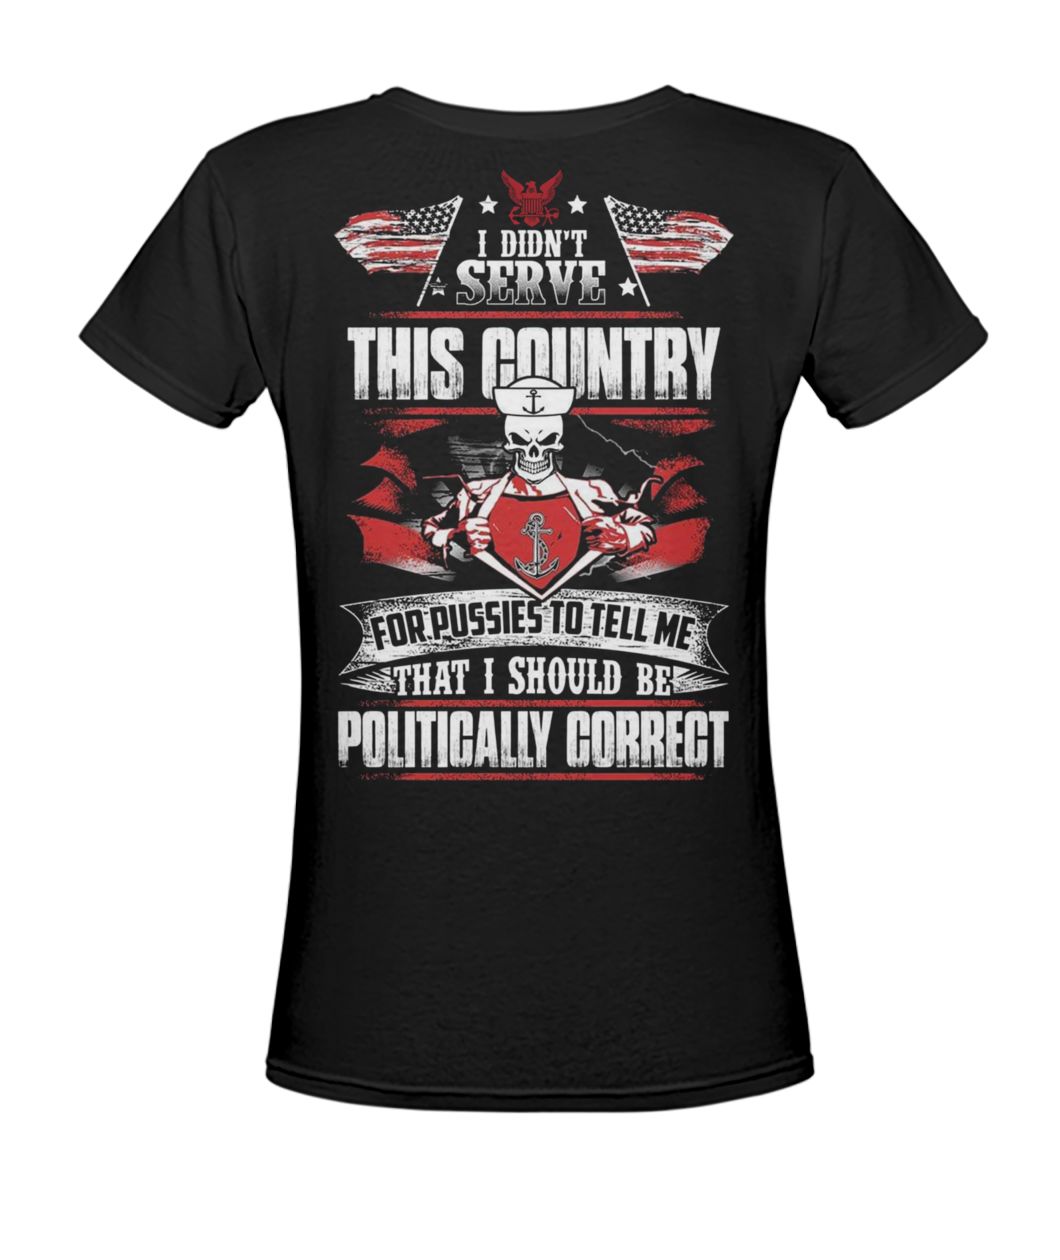 I didn't serve this country for pussies to tell me that I should be politically correct navy veteran women's v-neck